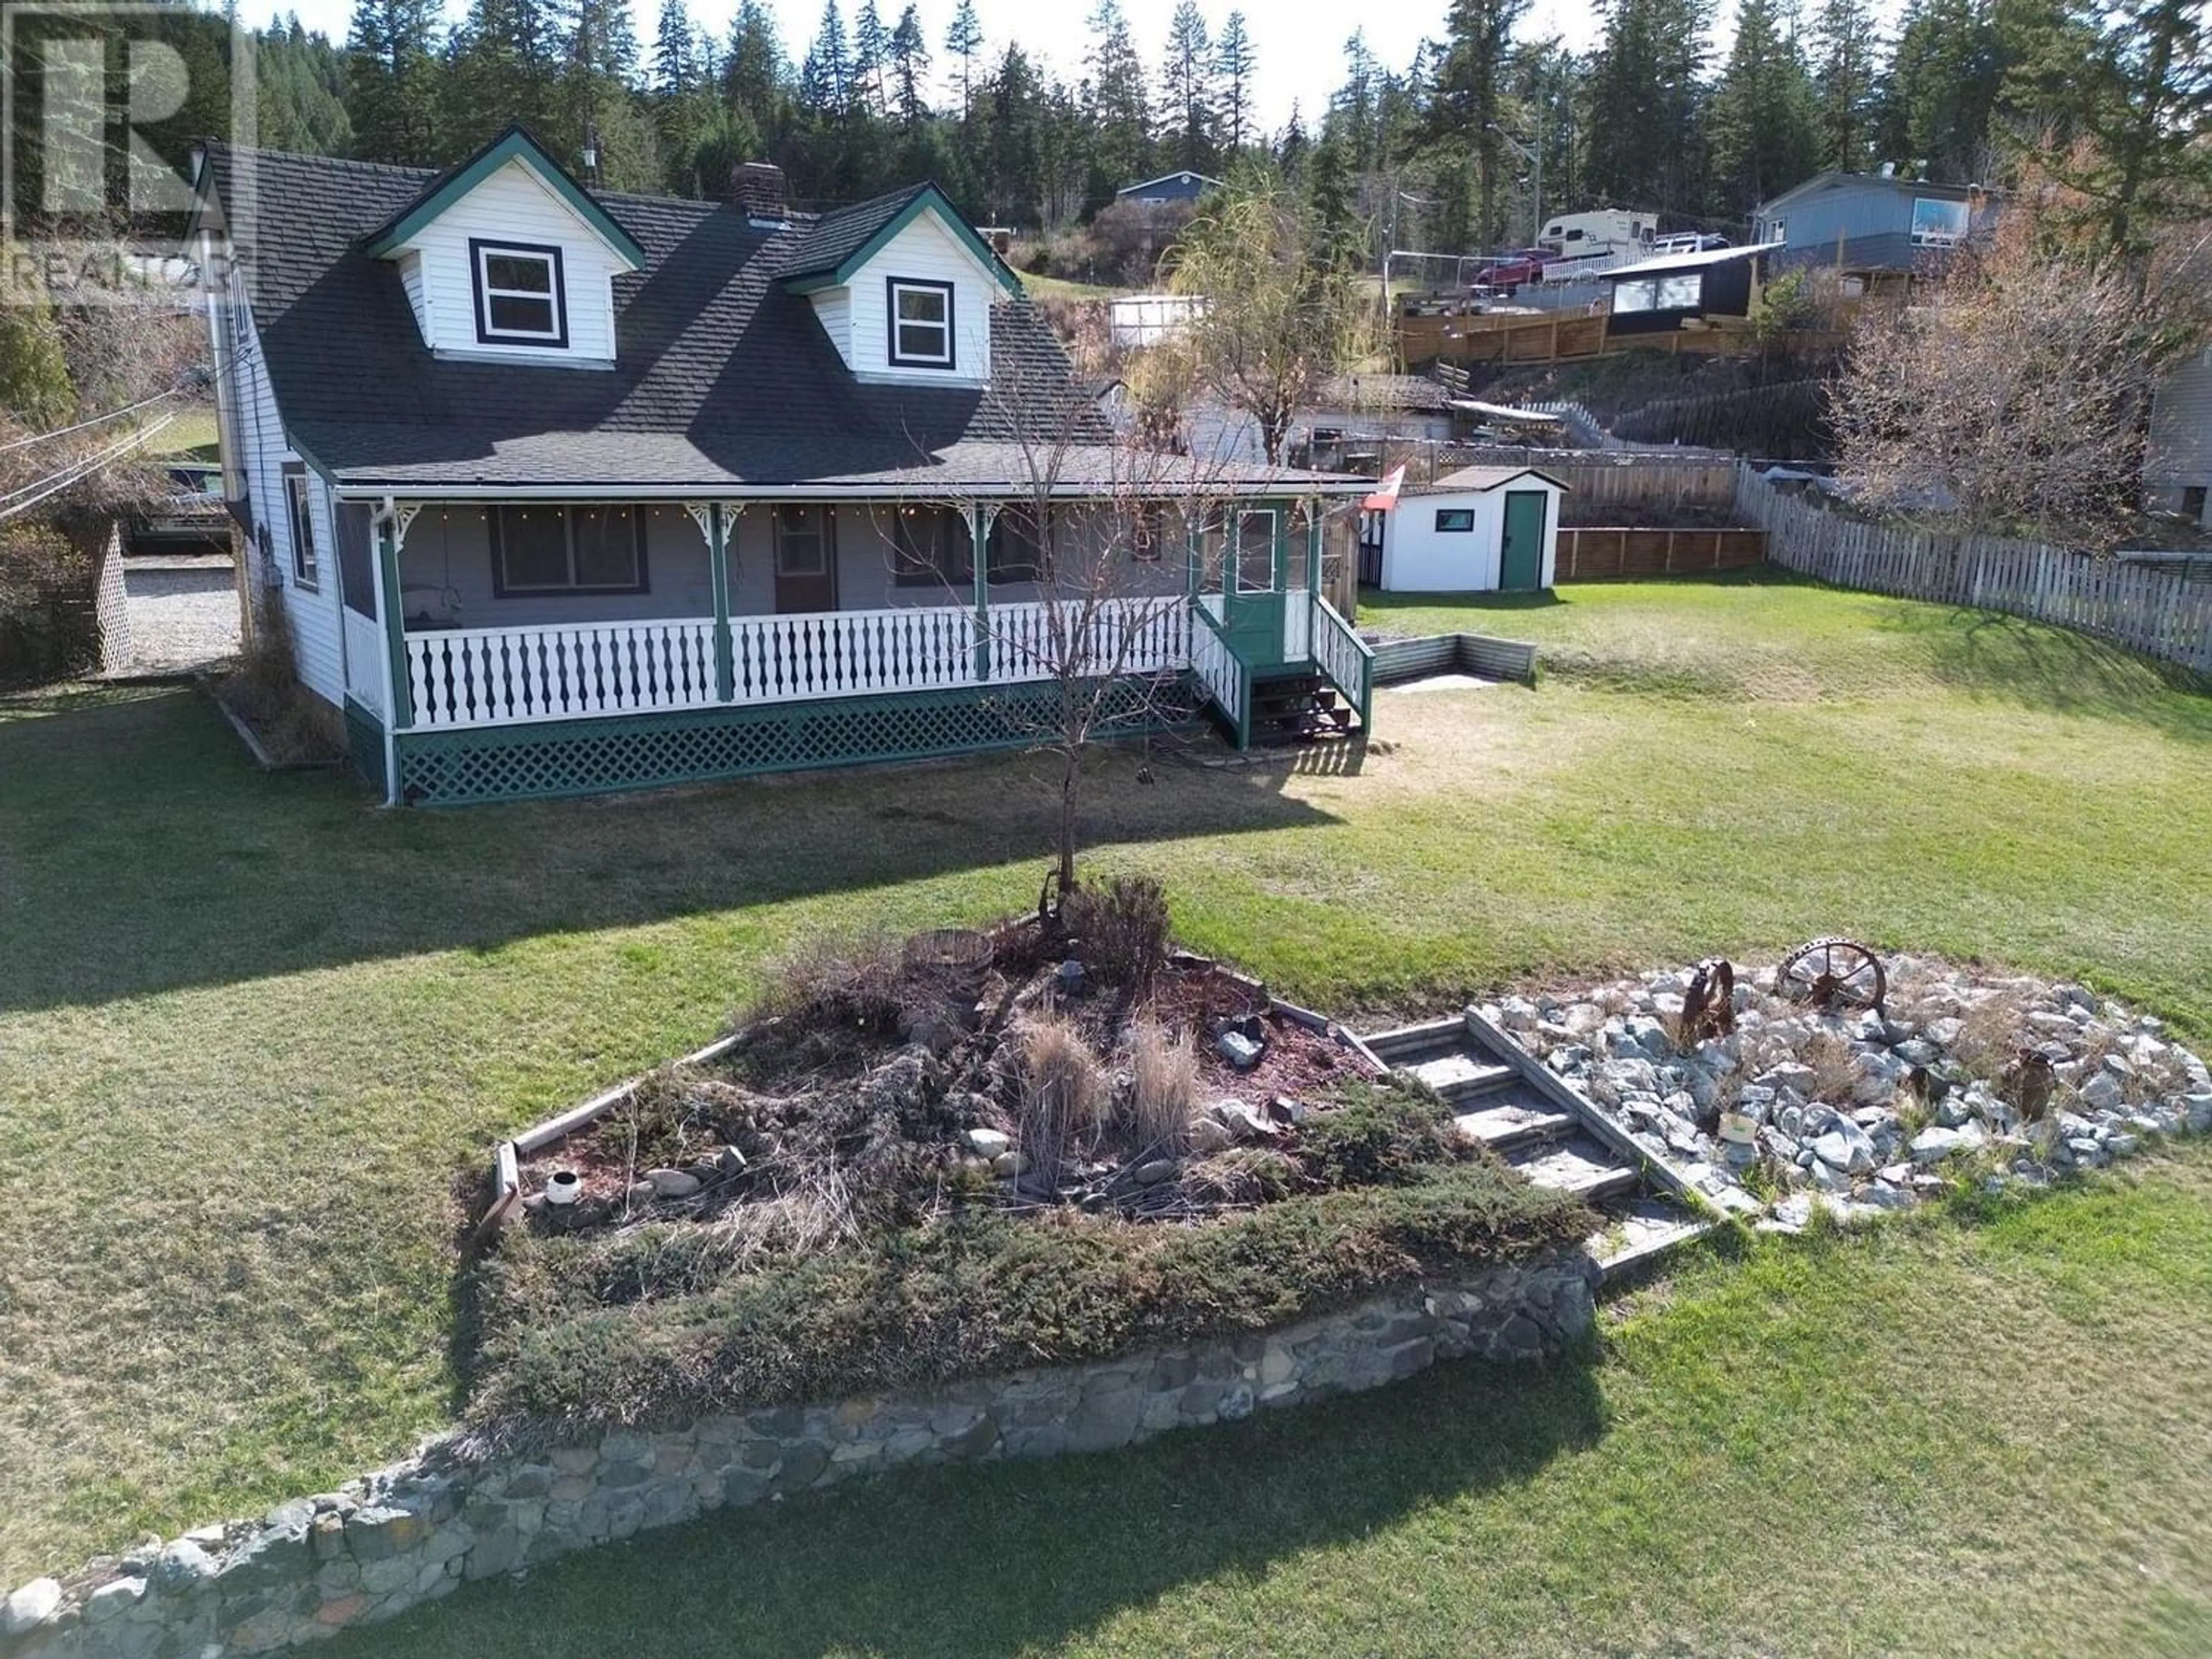 Frontside or backside of a home for 105 BIRCH HILL, Williams Lake British Columbia V2G3E4